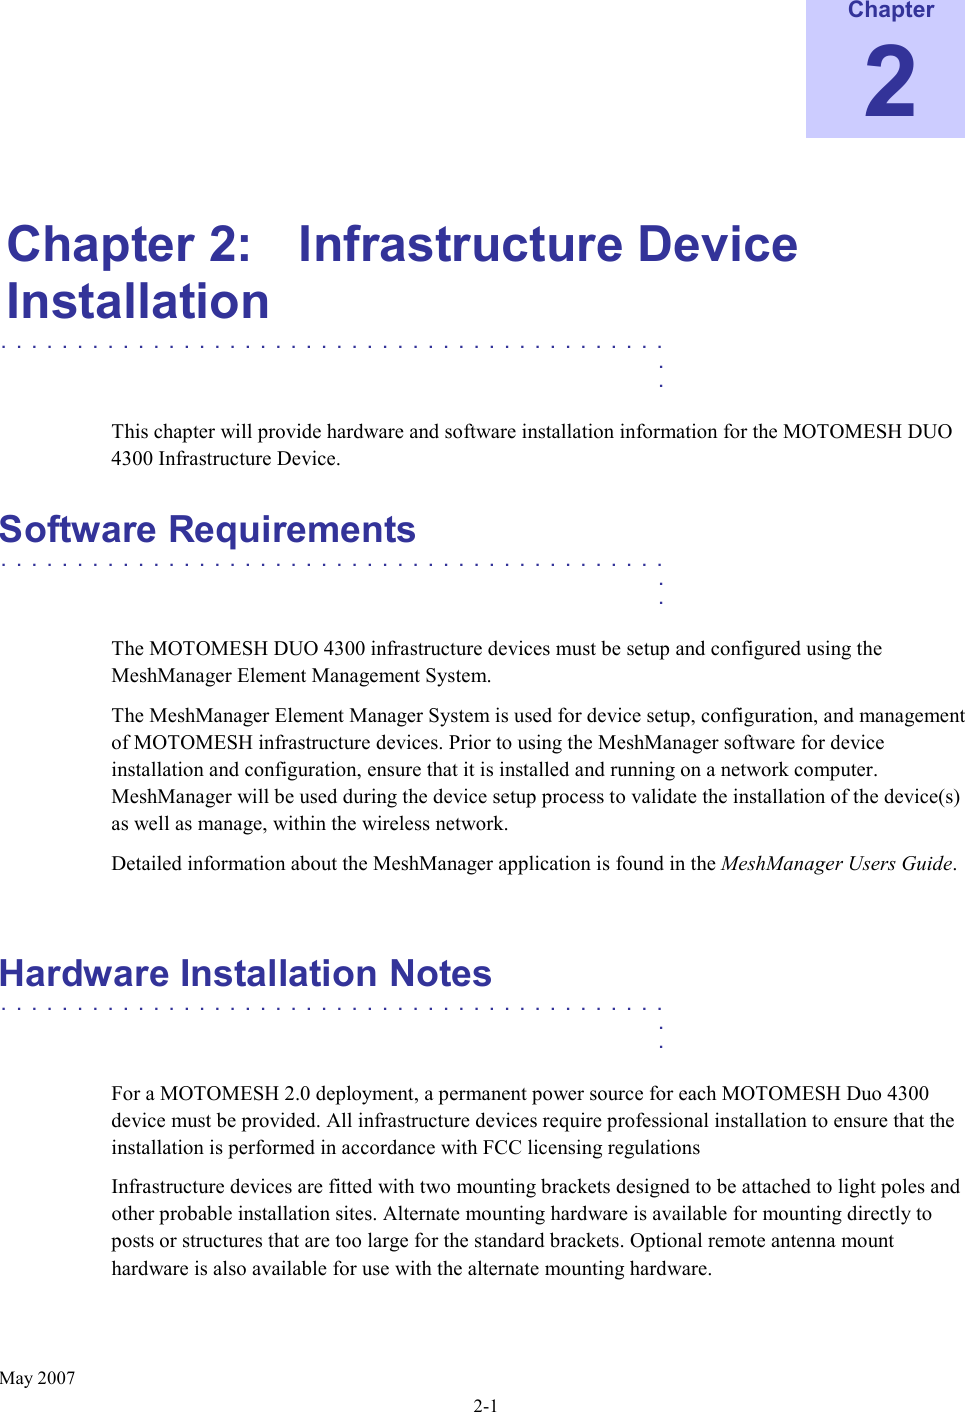    May 2007 2-1 Chapter 2  Chapter 2:  Infrastructure Device Installation ............................................   .    .  This chapter will provide hardware and software installation information for the MOTOMESH DUO 4300 Infrastructure Device. Software Requirements ............................................   .    .  The MOTOMESH DUO 4300 infrastructure devices must be setup and configured using the MeshManager Element Management System. The MeshManager Element Manager System is used for device setup, configuration, and management of MOTOMESH infrastructure devices. Prior to using the MeshManager software for device installation and configuration, ensure that it is installed and running on a network computer.  MeshManager will be used during the device setup process to validate the installation of the device(s) as well as manage, within the wireless network. Detailed information about the MeshManager application is found in the MeshManager Users Guide.  Hardware Installation Notes ............................................   .    .  For a MOTOMESH 2.0 deployment, a permanent power source for each MOTOMESH Duo 4300 device must be provided. All infrastructure devices require professional installation to ensure that the installation is performed in accordance with FCC licensing regulations Infrastructure devices are fitted with two mounting brackets designed to be attached to light poles and other probable installation sites. Alternate mounting hardware is available for mounting directly to posts or structures that are too large for the standard brackets. Optional remote antenna mount hardware is also available for use with the alternate mounting hardware. 